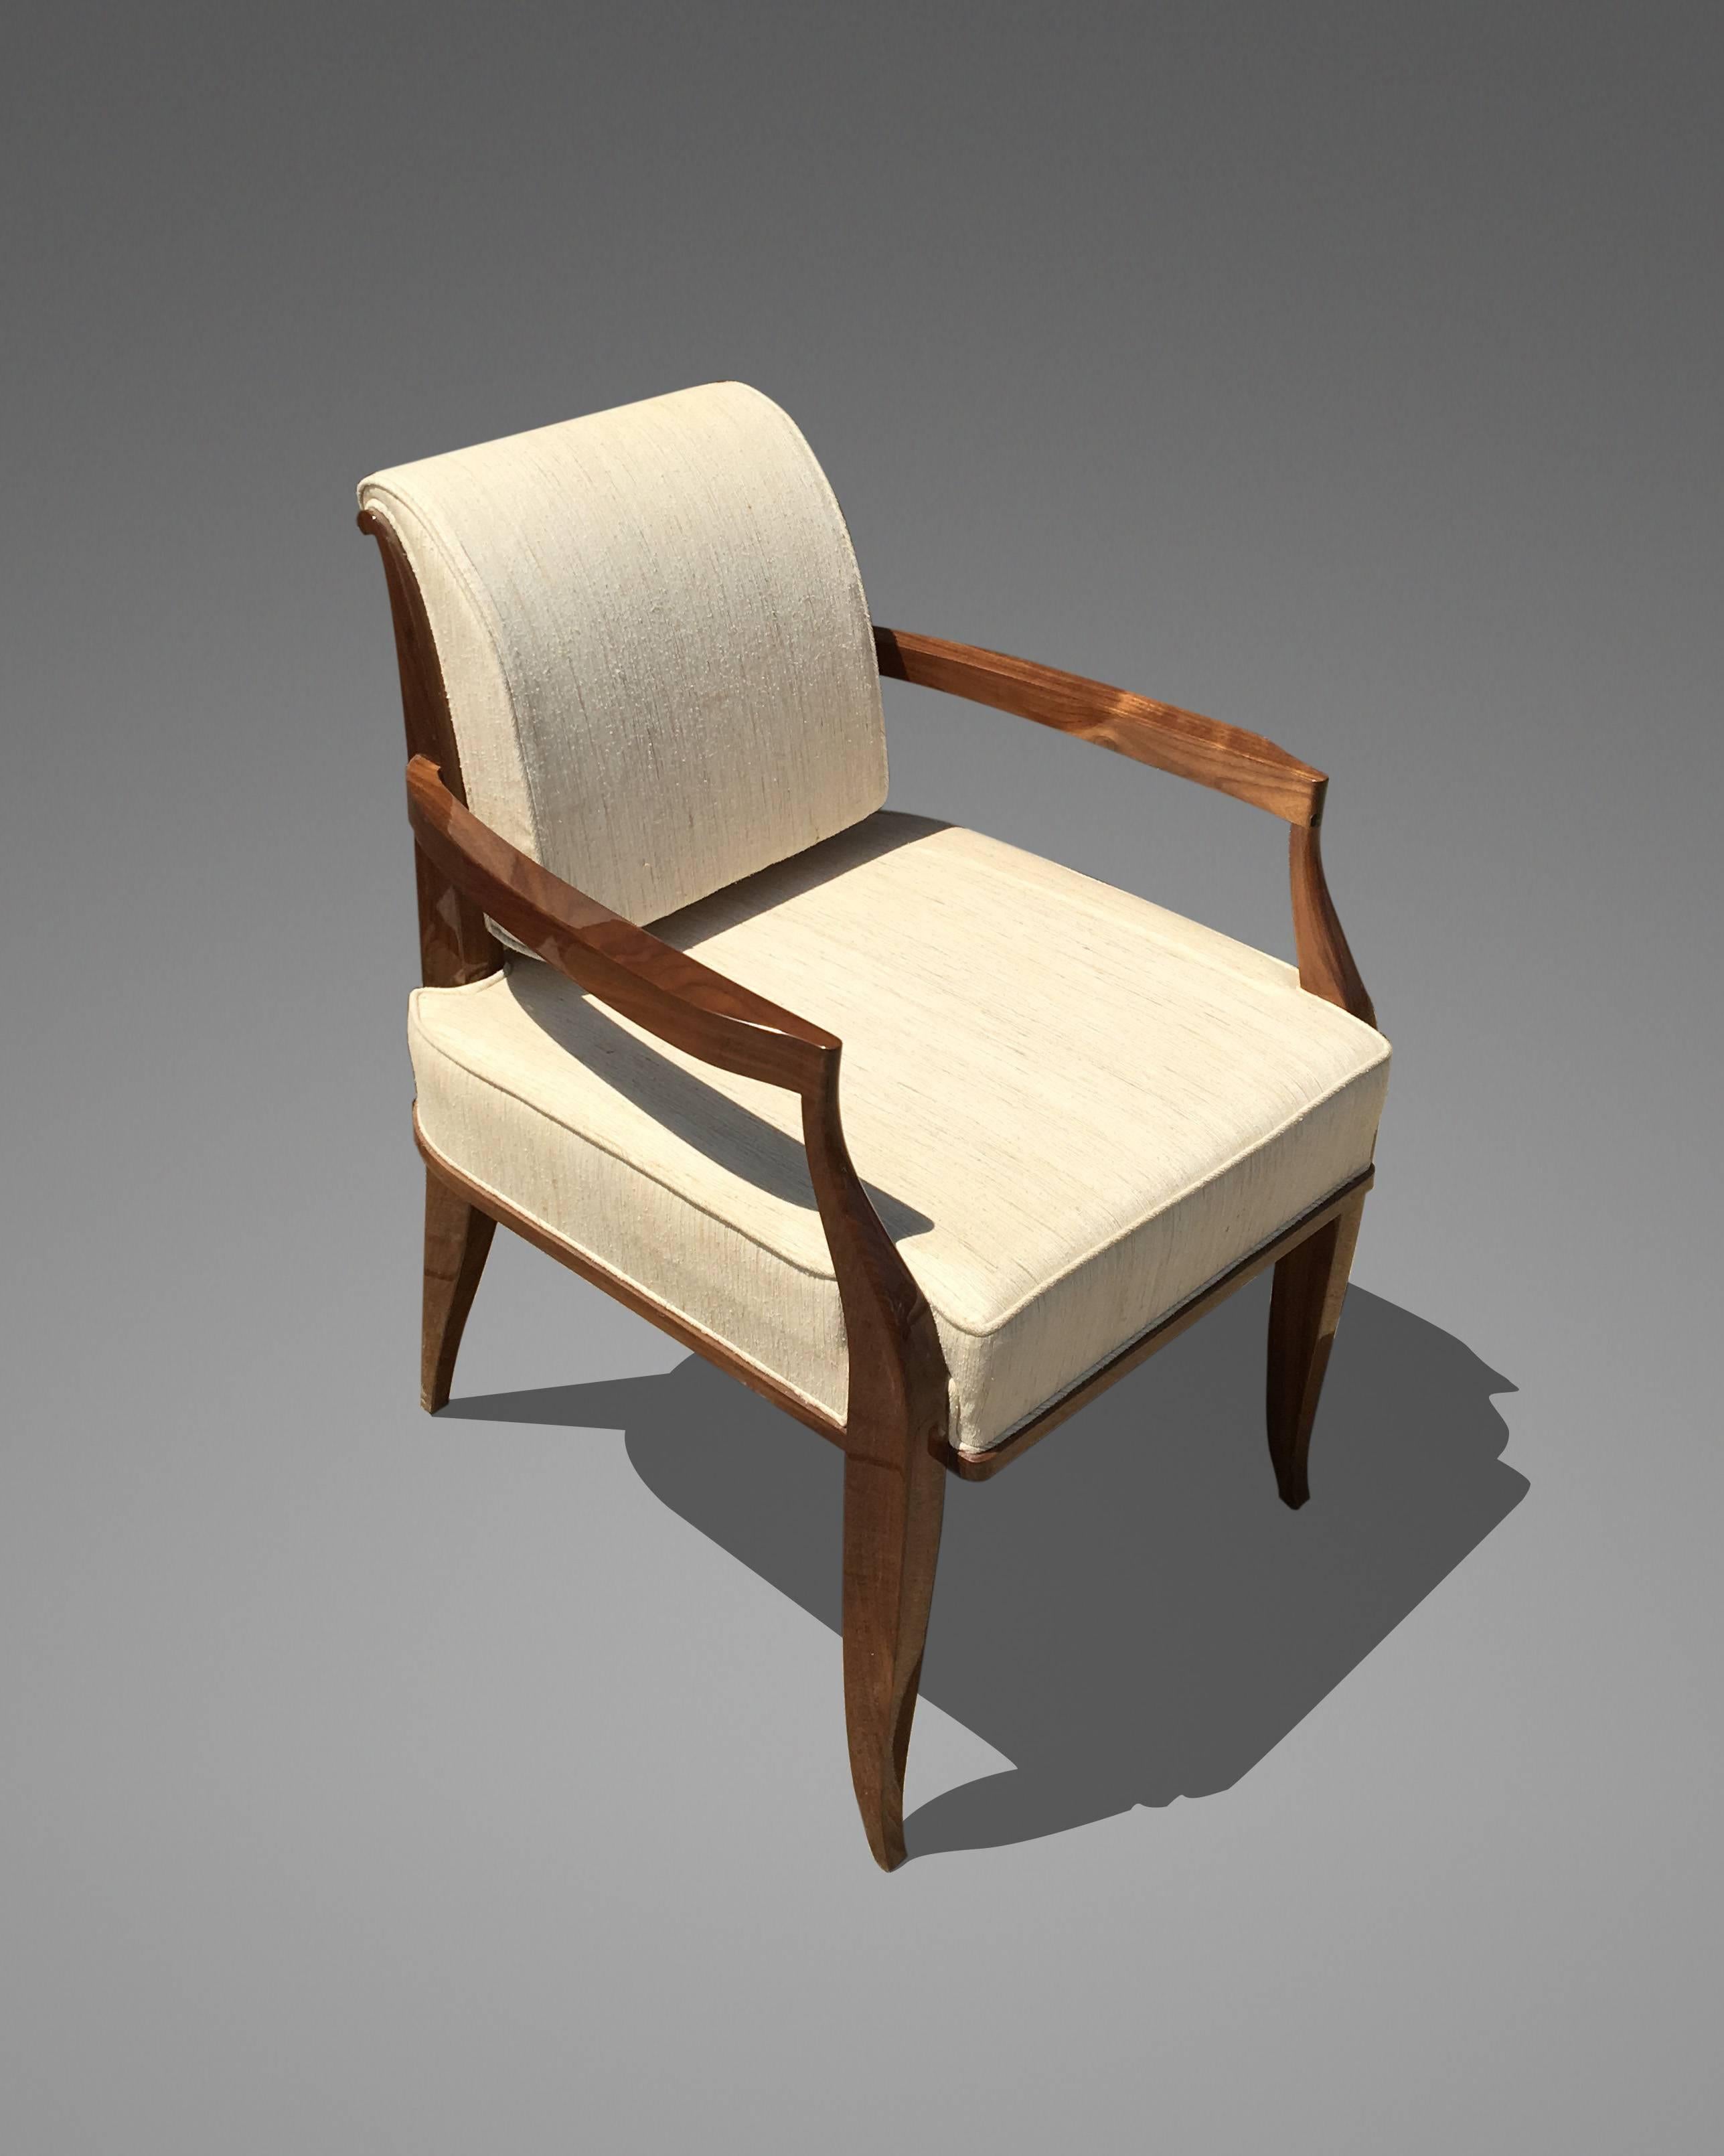 Armchair made of walnut with a high polish. The armchair is part of a set: Including two armchairs and six side chairs.